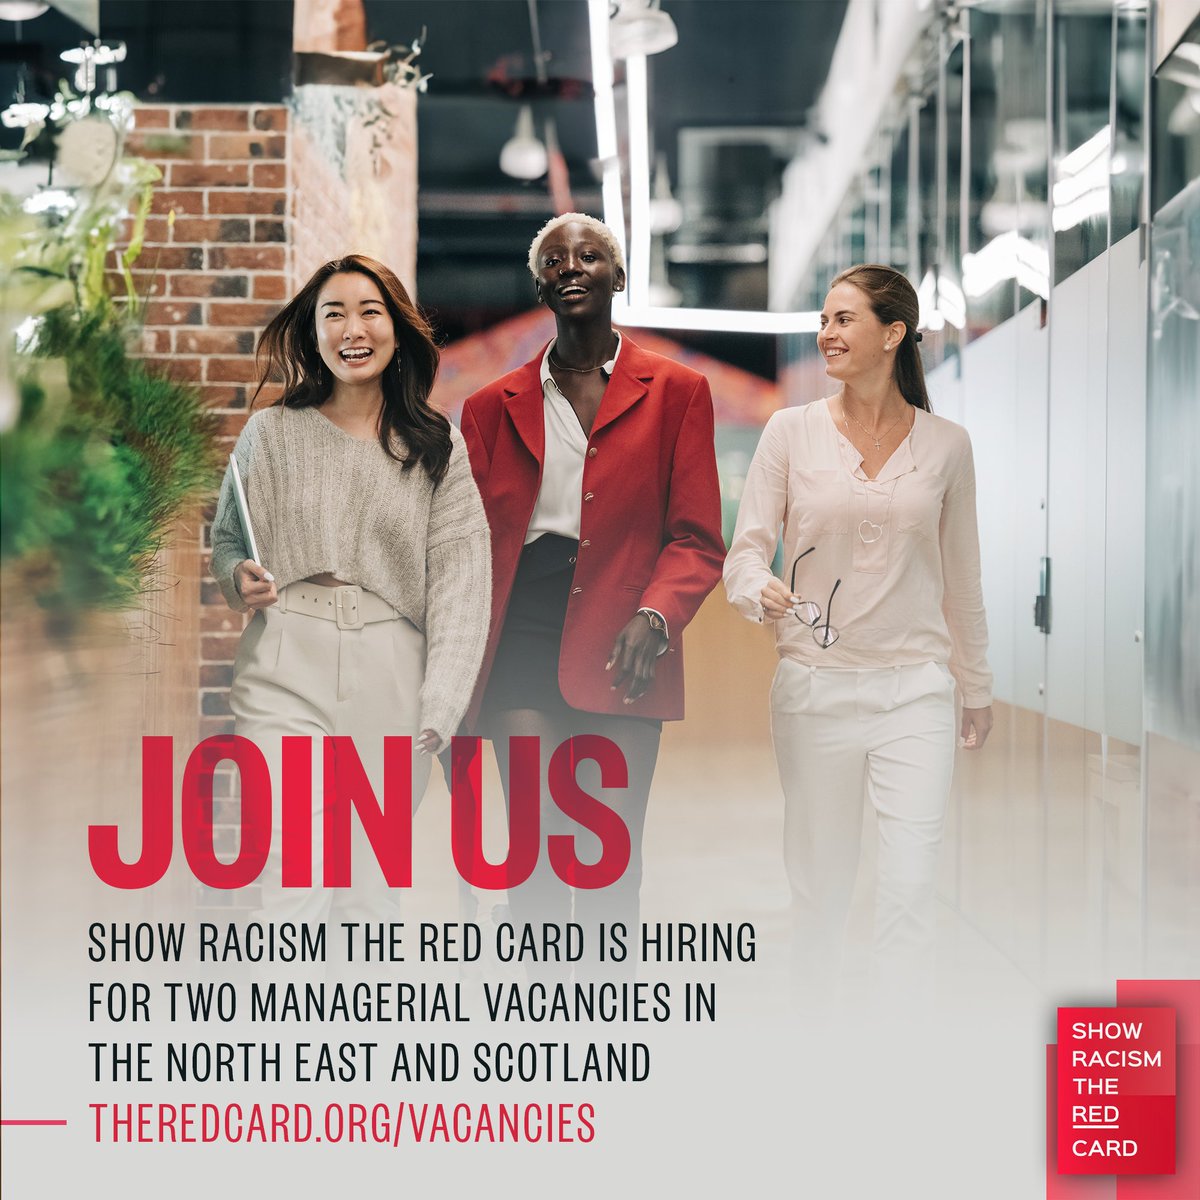 Show Racism the Red Card is hiring for two managerial vacancies in the North East and Scotland. Join us. Discover the power of Educating Against Racism. 🔗 theredcard.org/vacancies